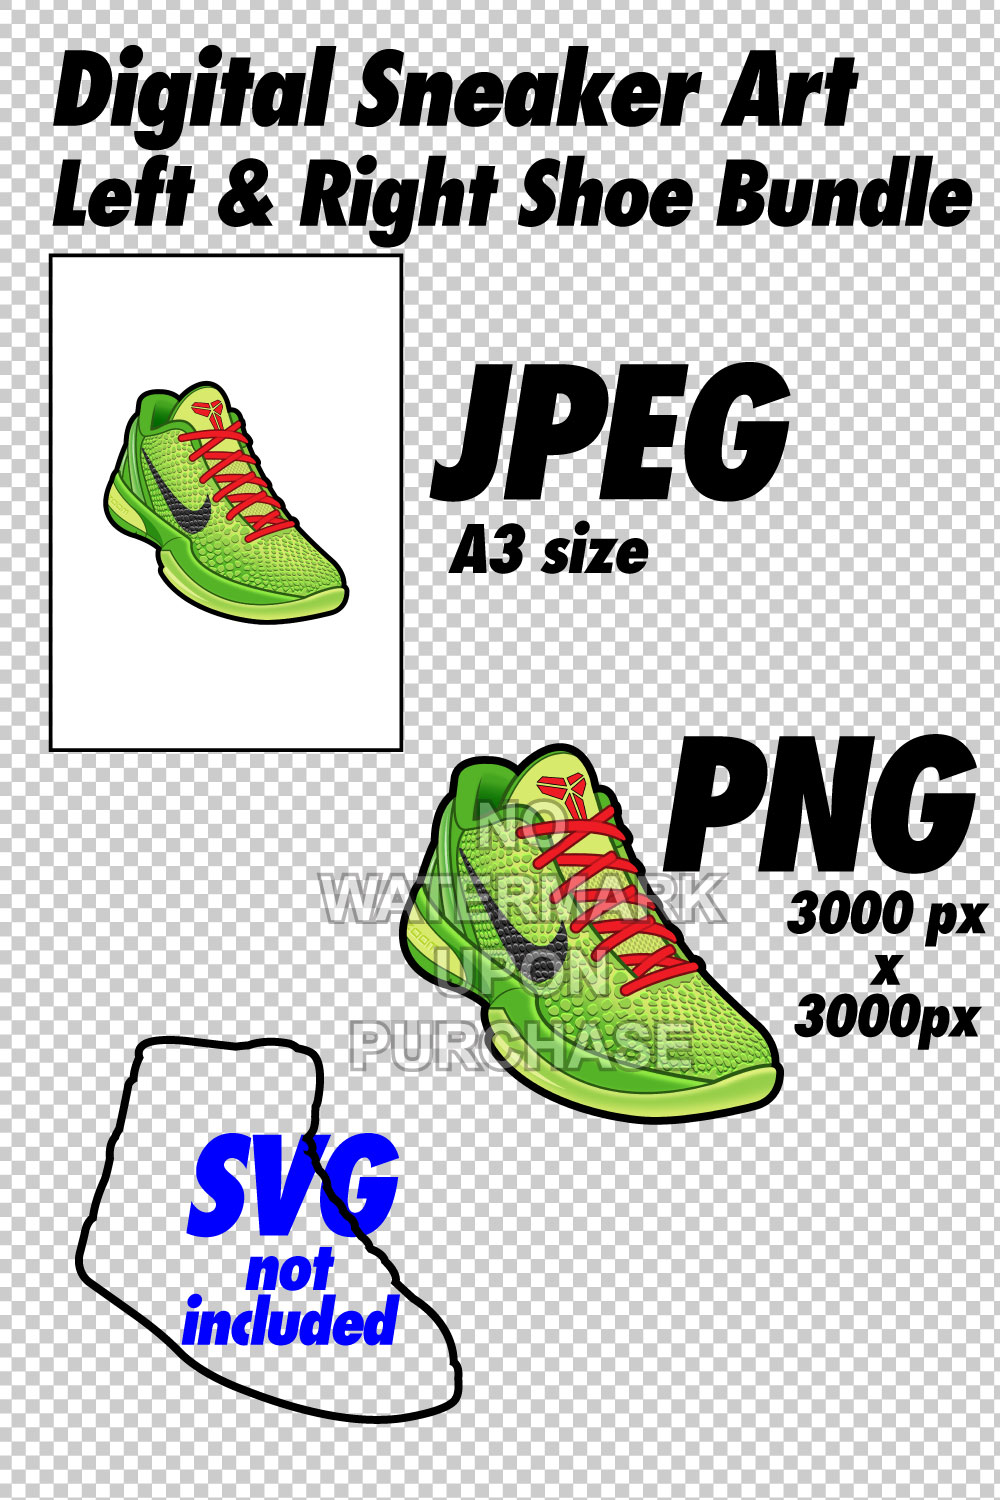 Kobe 6 Grinch with lace swap digital sneaker art in JPEG PNG files pinterest preview image.